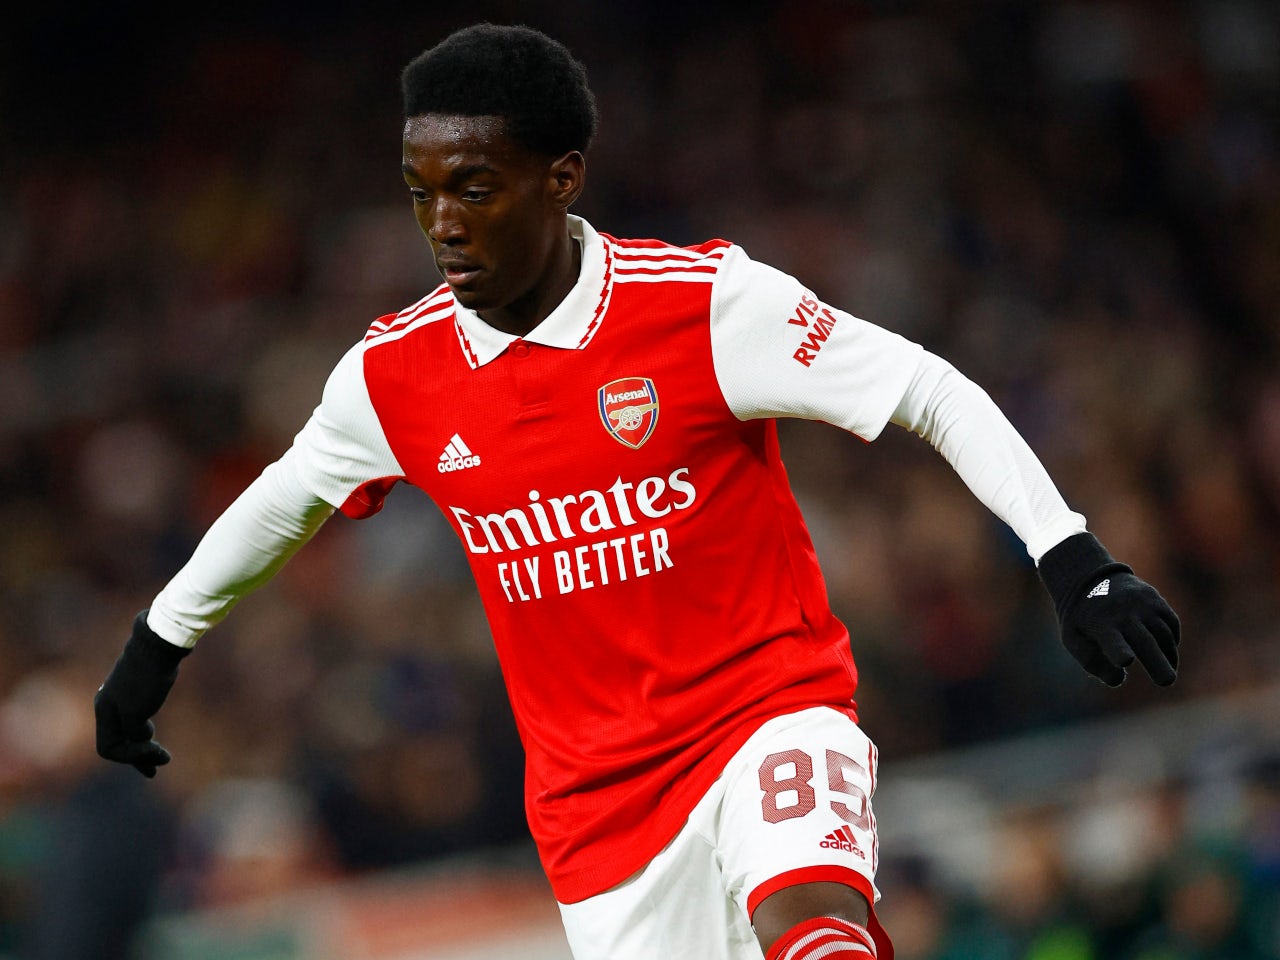 Amario Cozier-Duberry in line for Arsenal debut against West Ham United?